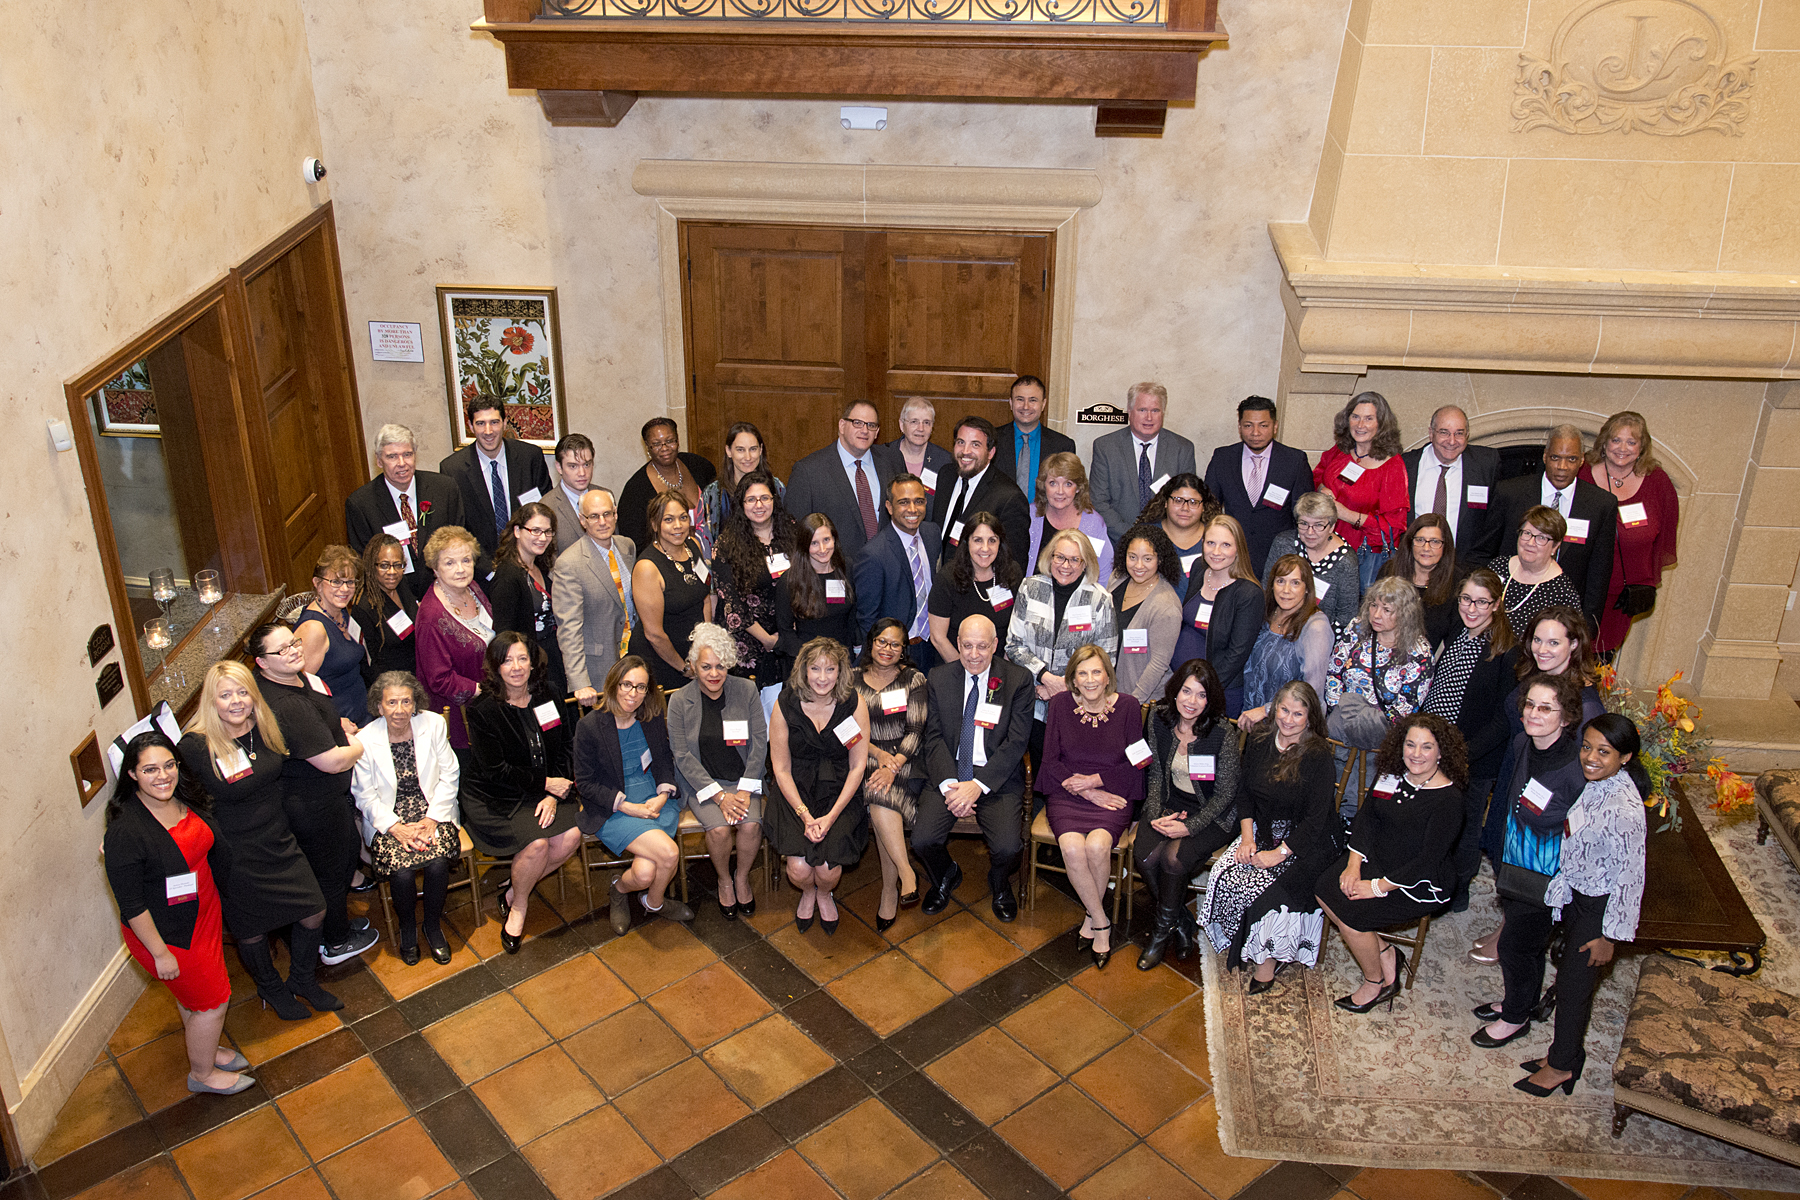 Check out the photos from our 2019 Commitment to Justice Event!